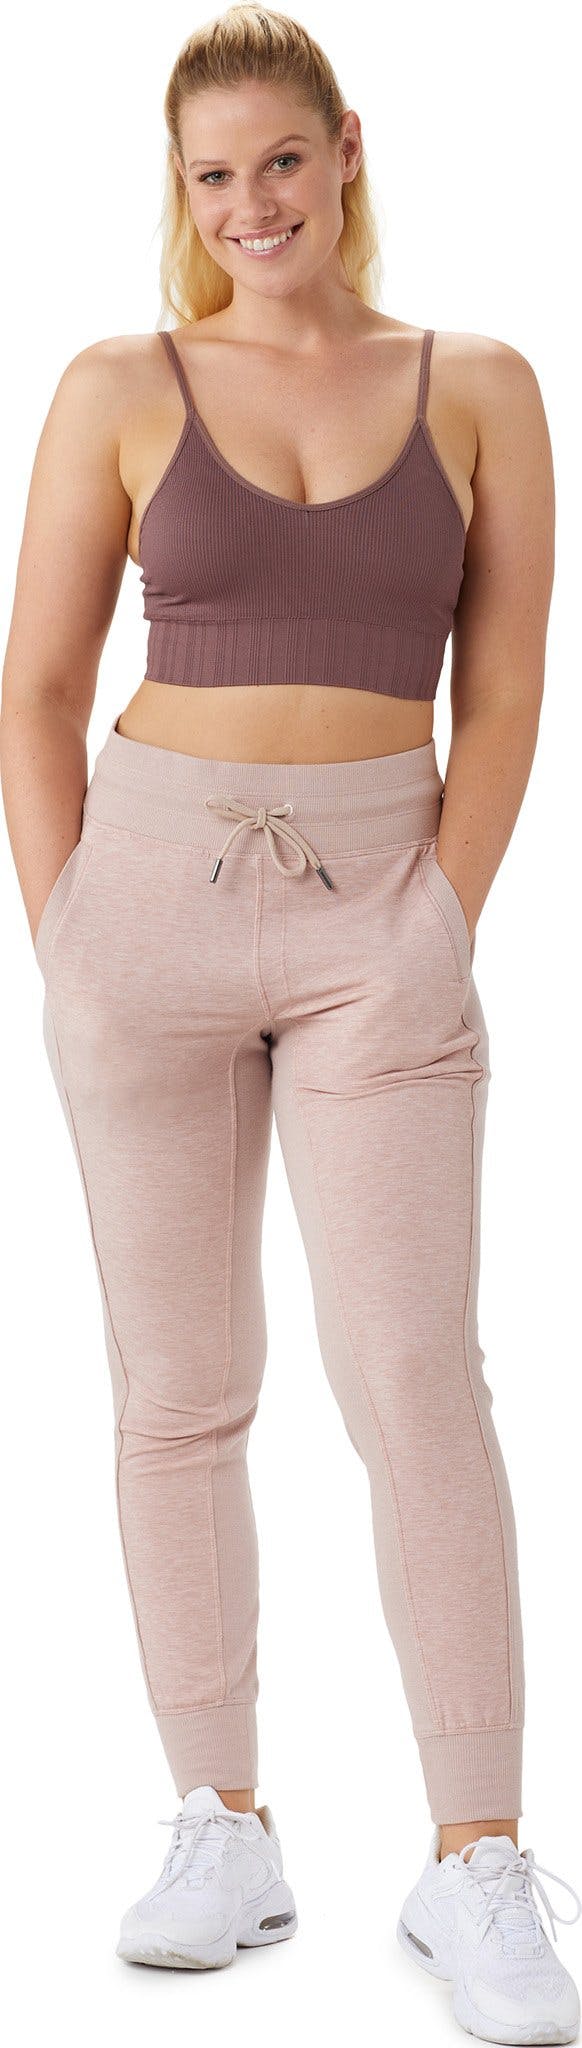 Product image for Dionne Jogger - Women's